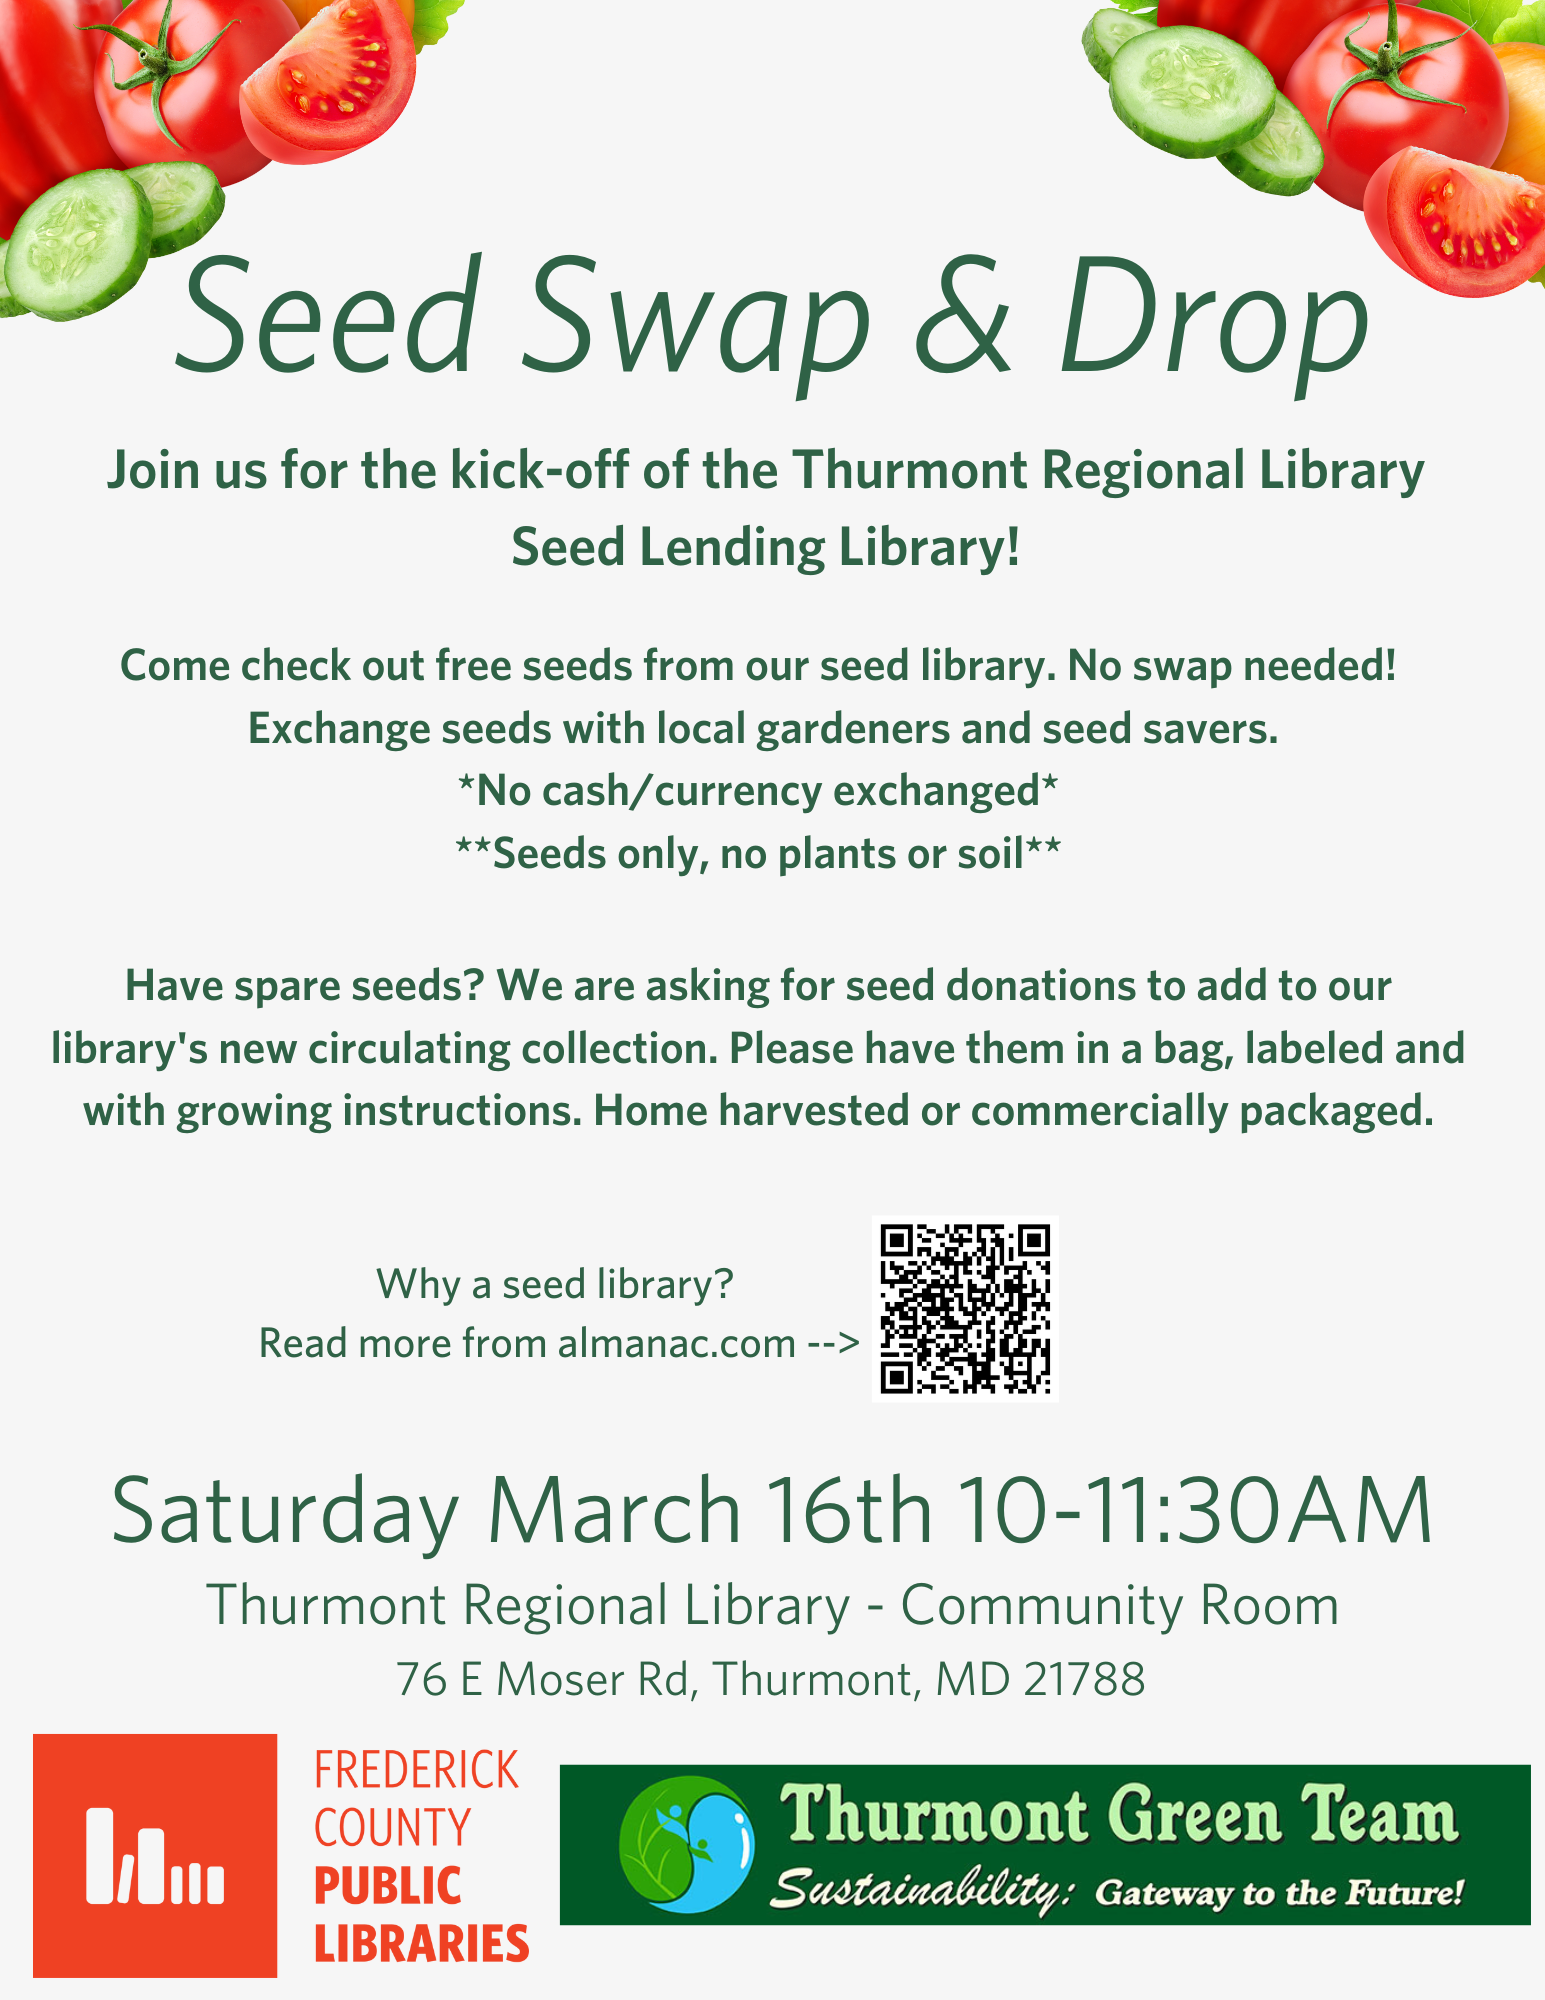 Flyer for Seed Swap & Drop March 16th at 10am in the Thurmont Regional Library